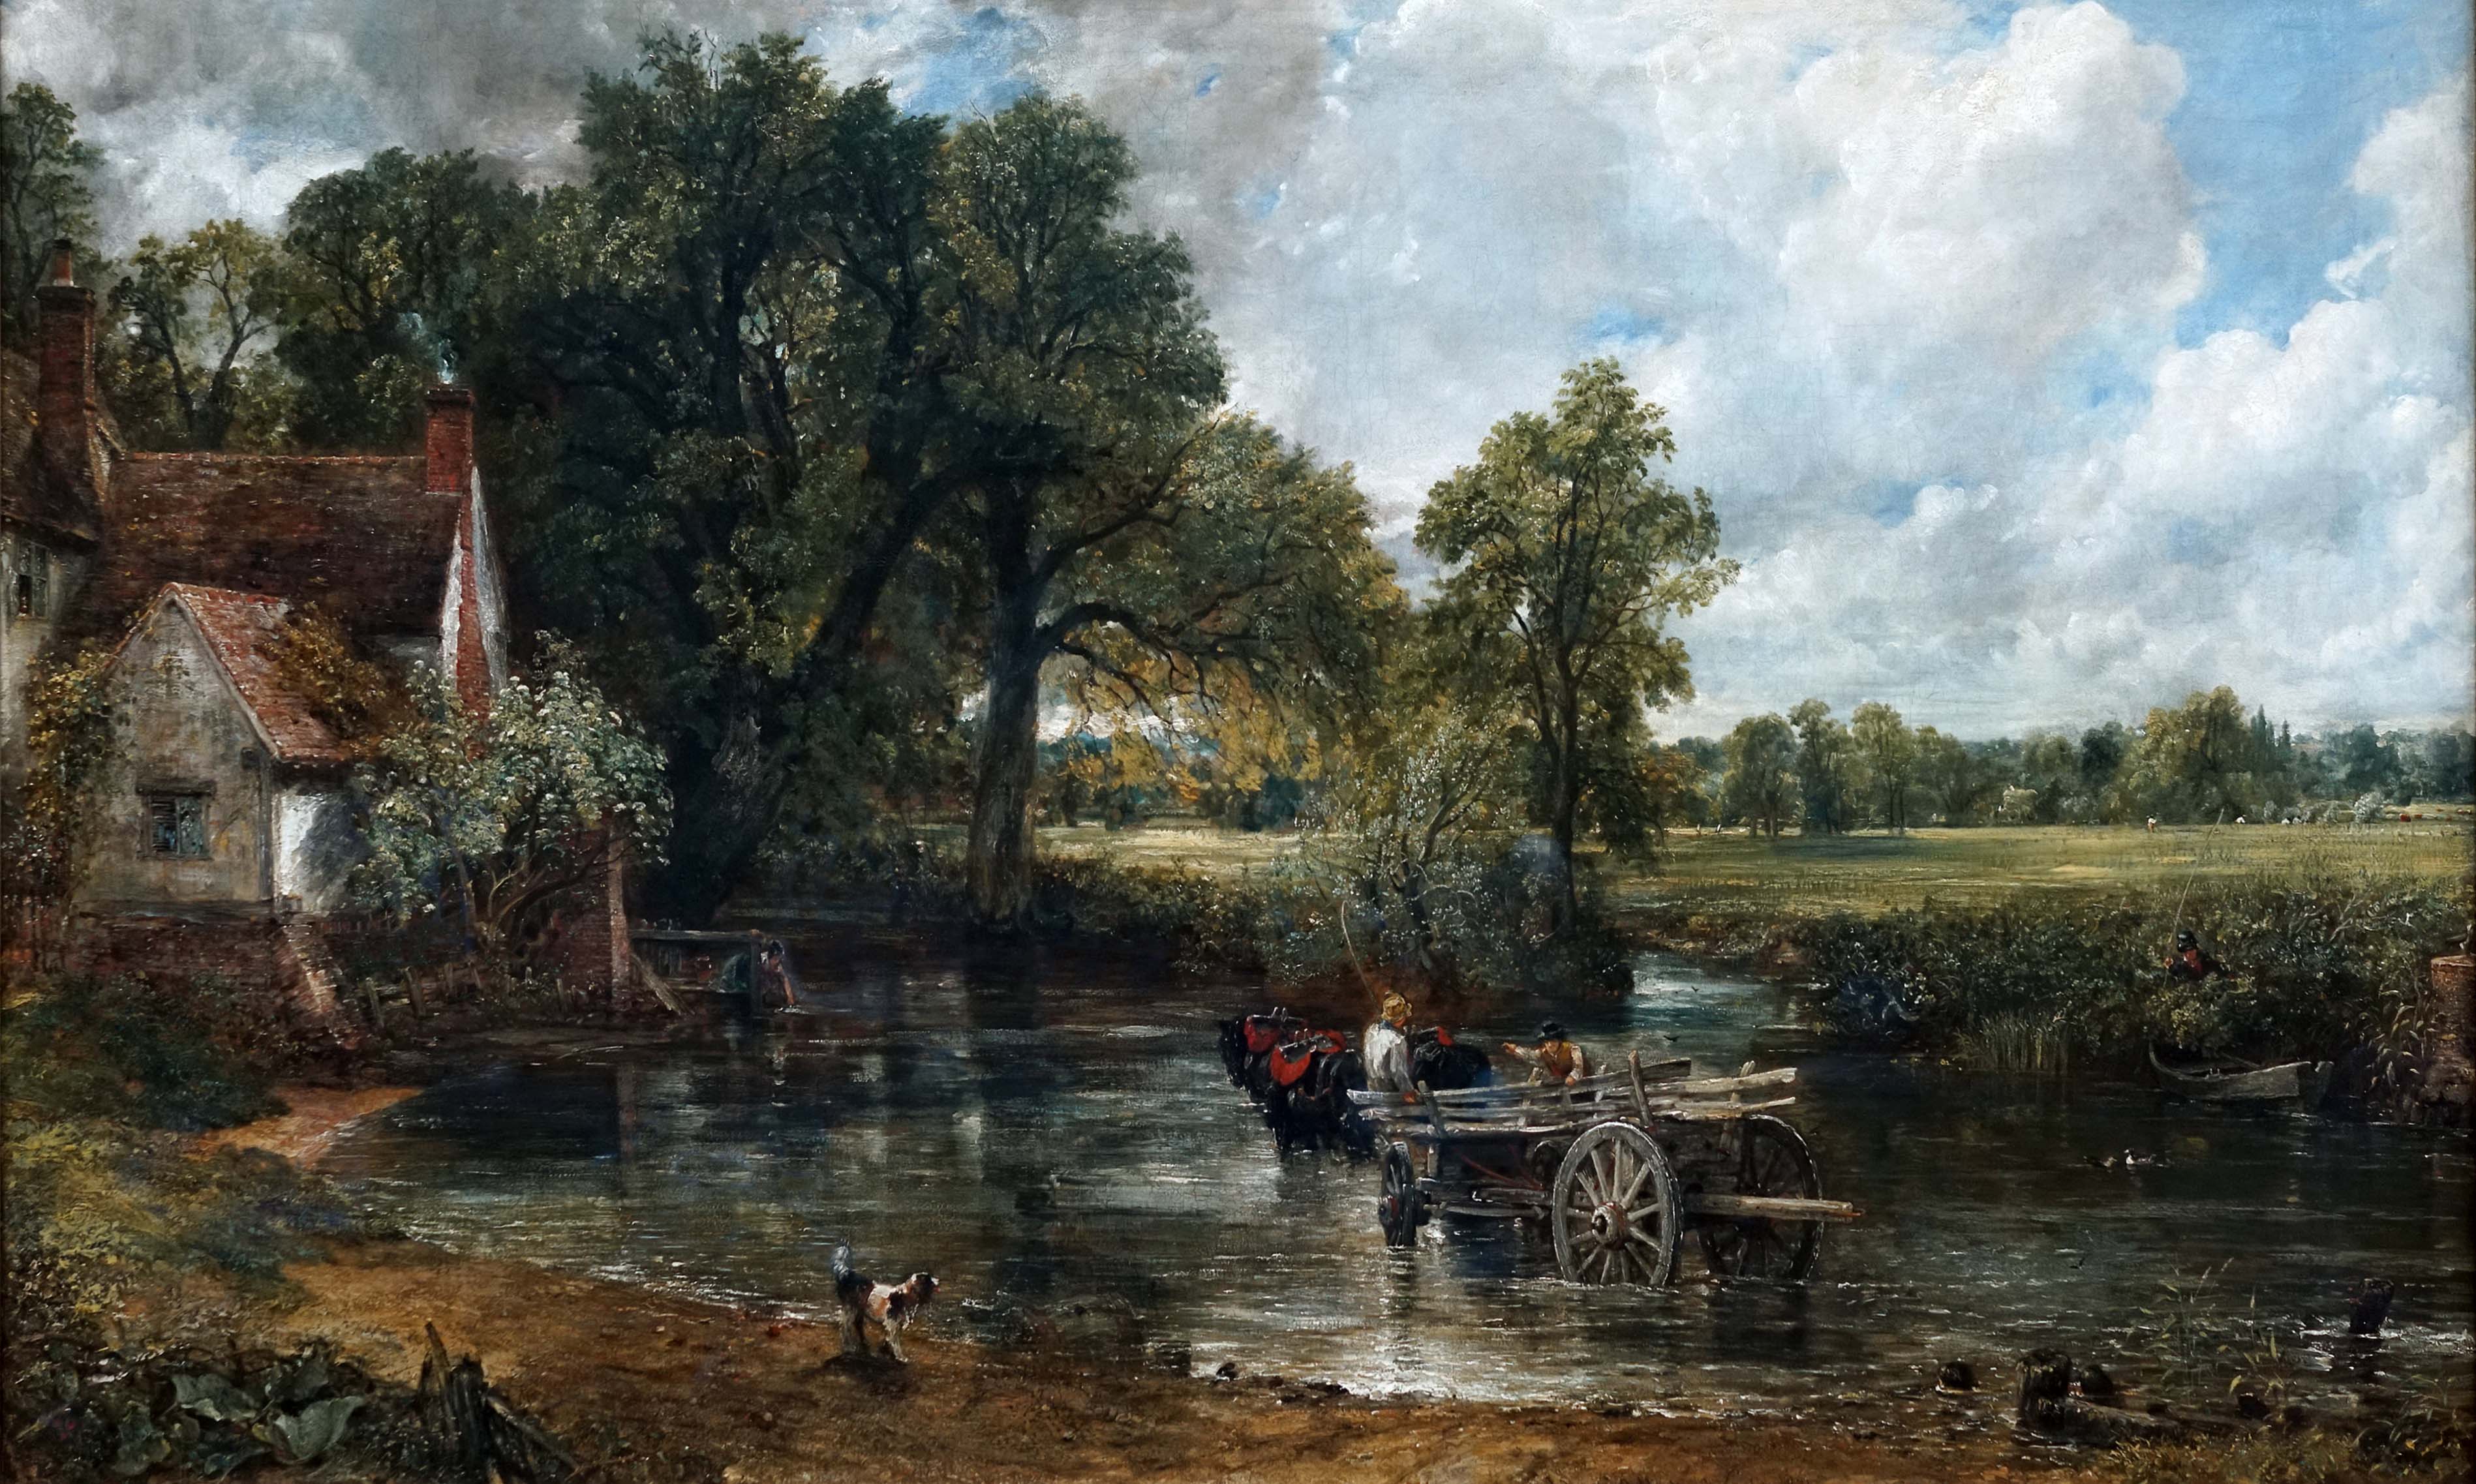 John Constable, The Hay Wain (Landscape: Noon), 1821, oil on canvas, 130.2 x 185.4 cm (The National Gallery, London).